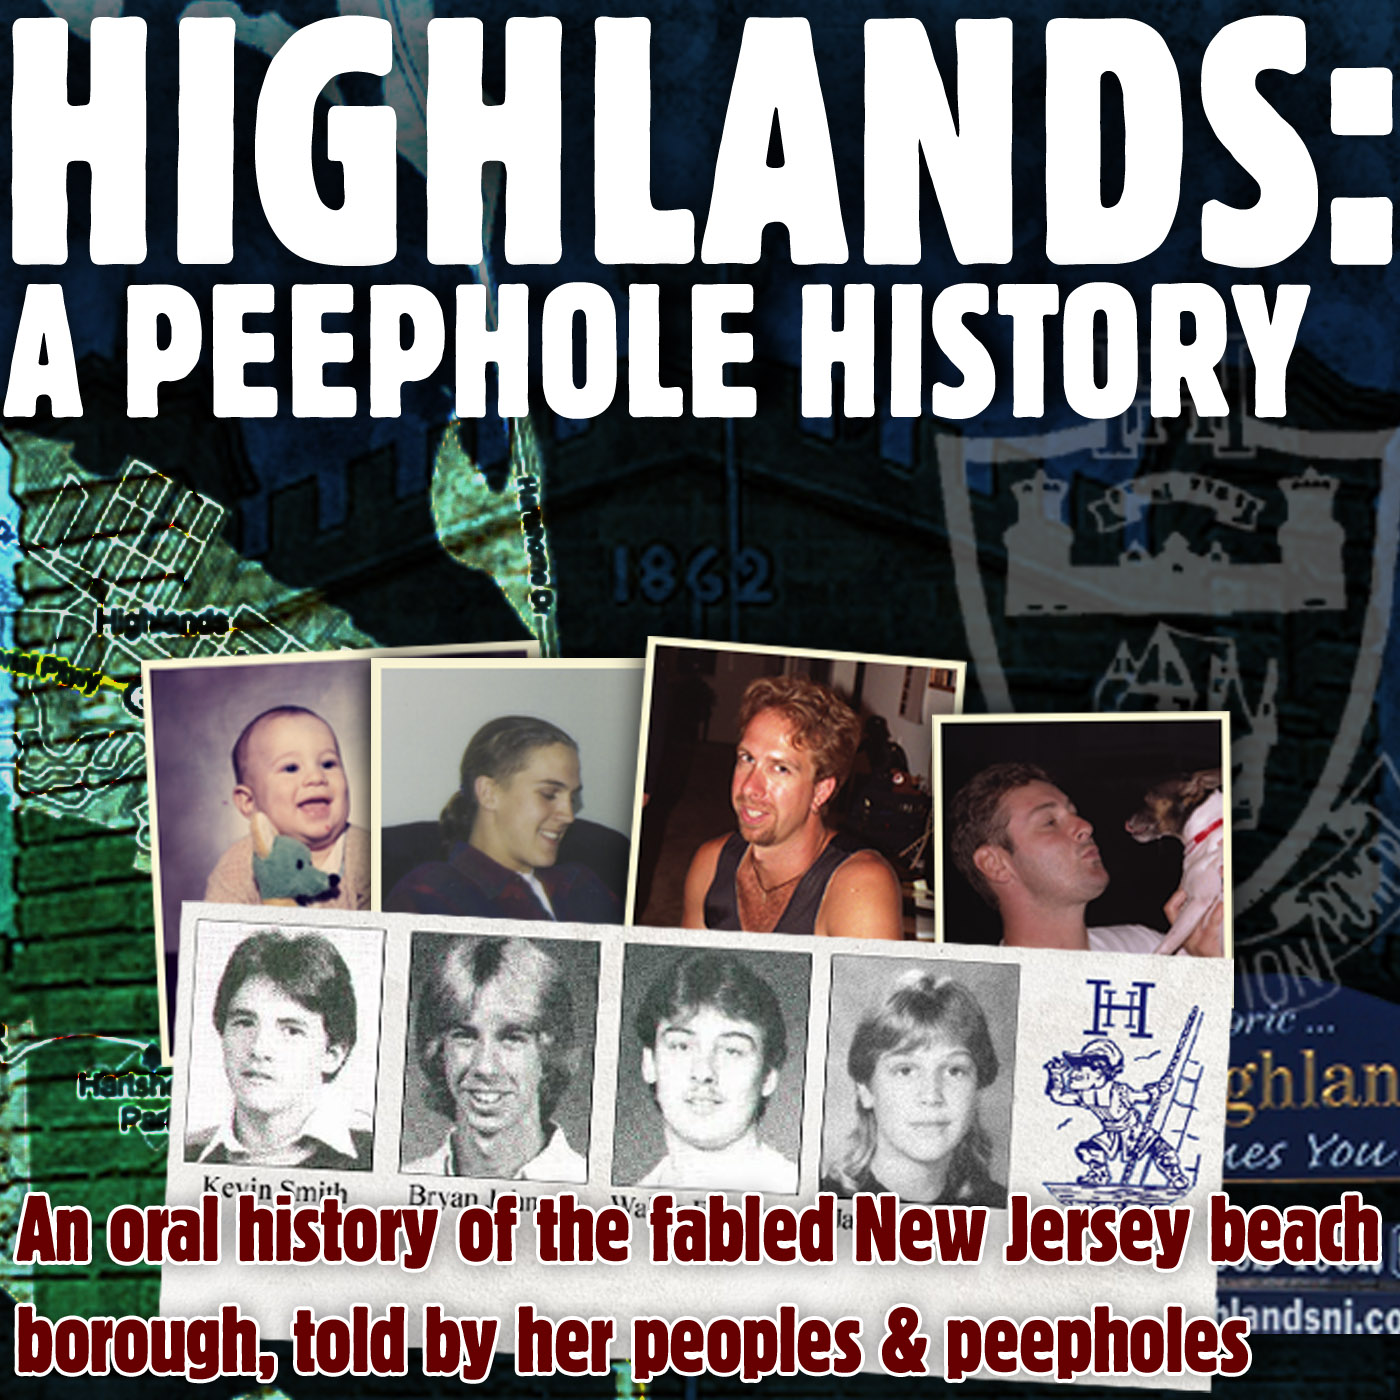 Highlands: A Peephole History 12: The Tooth Fairy